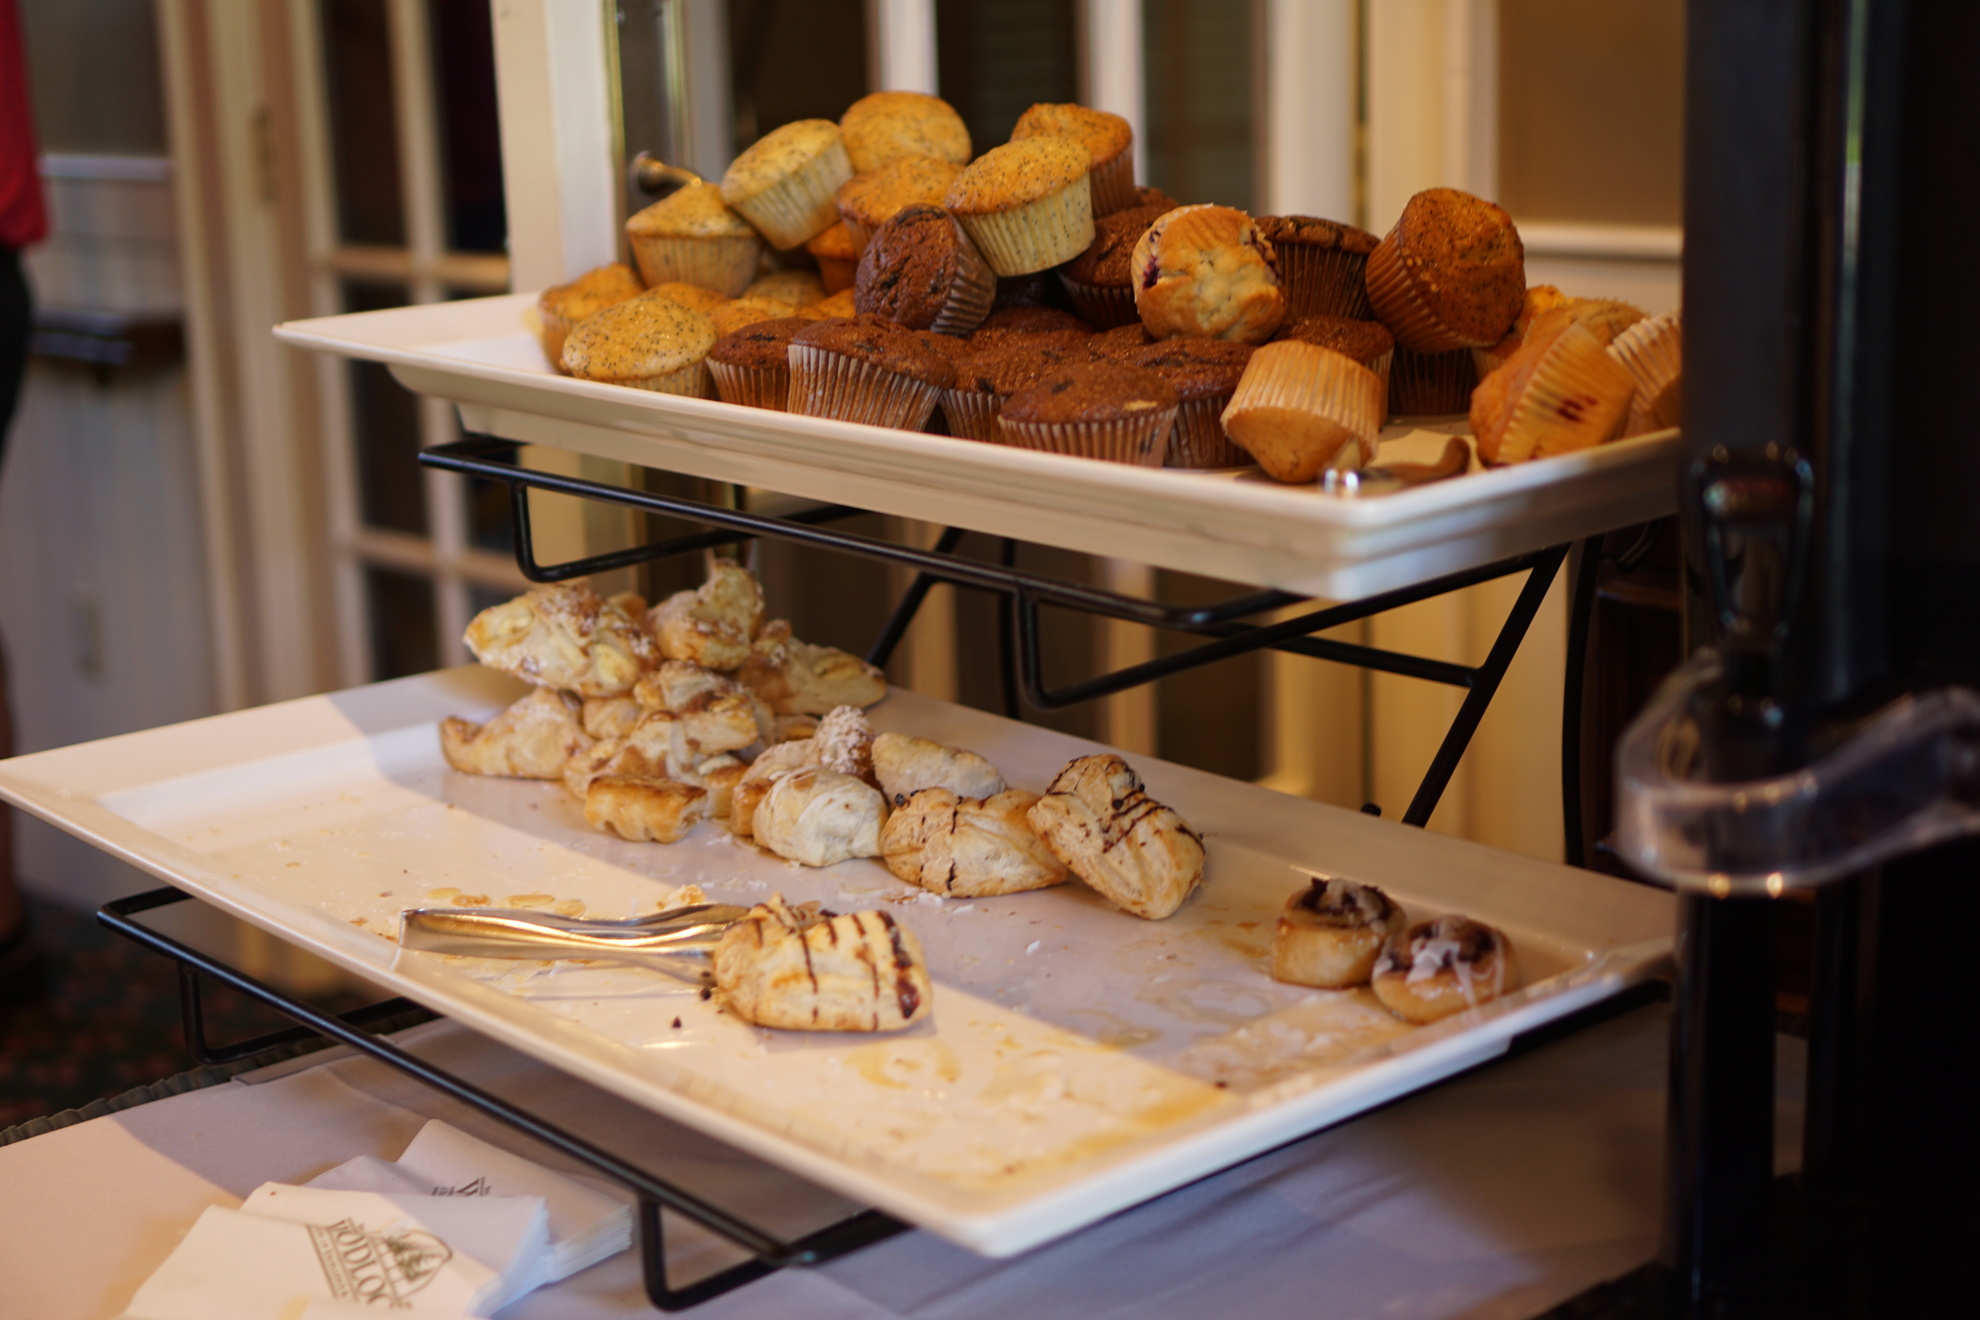 Breakfast pastries and muffins.